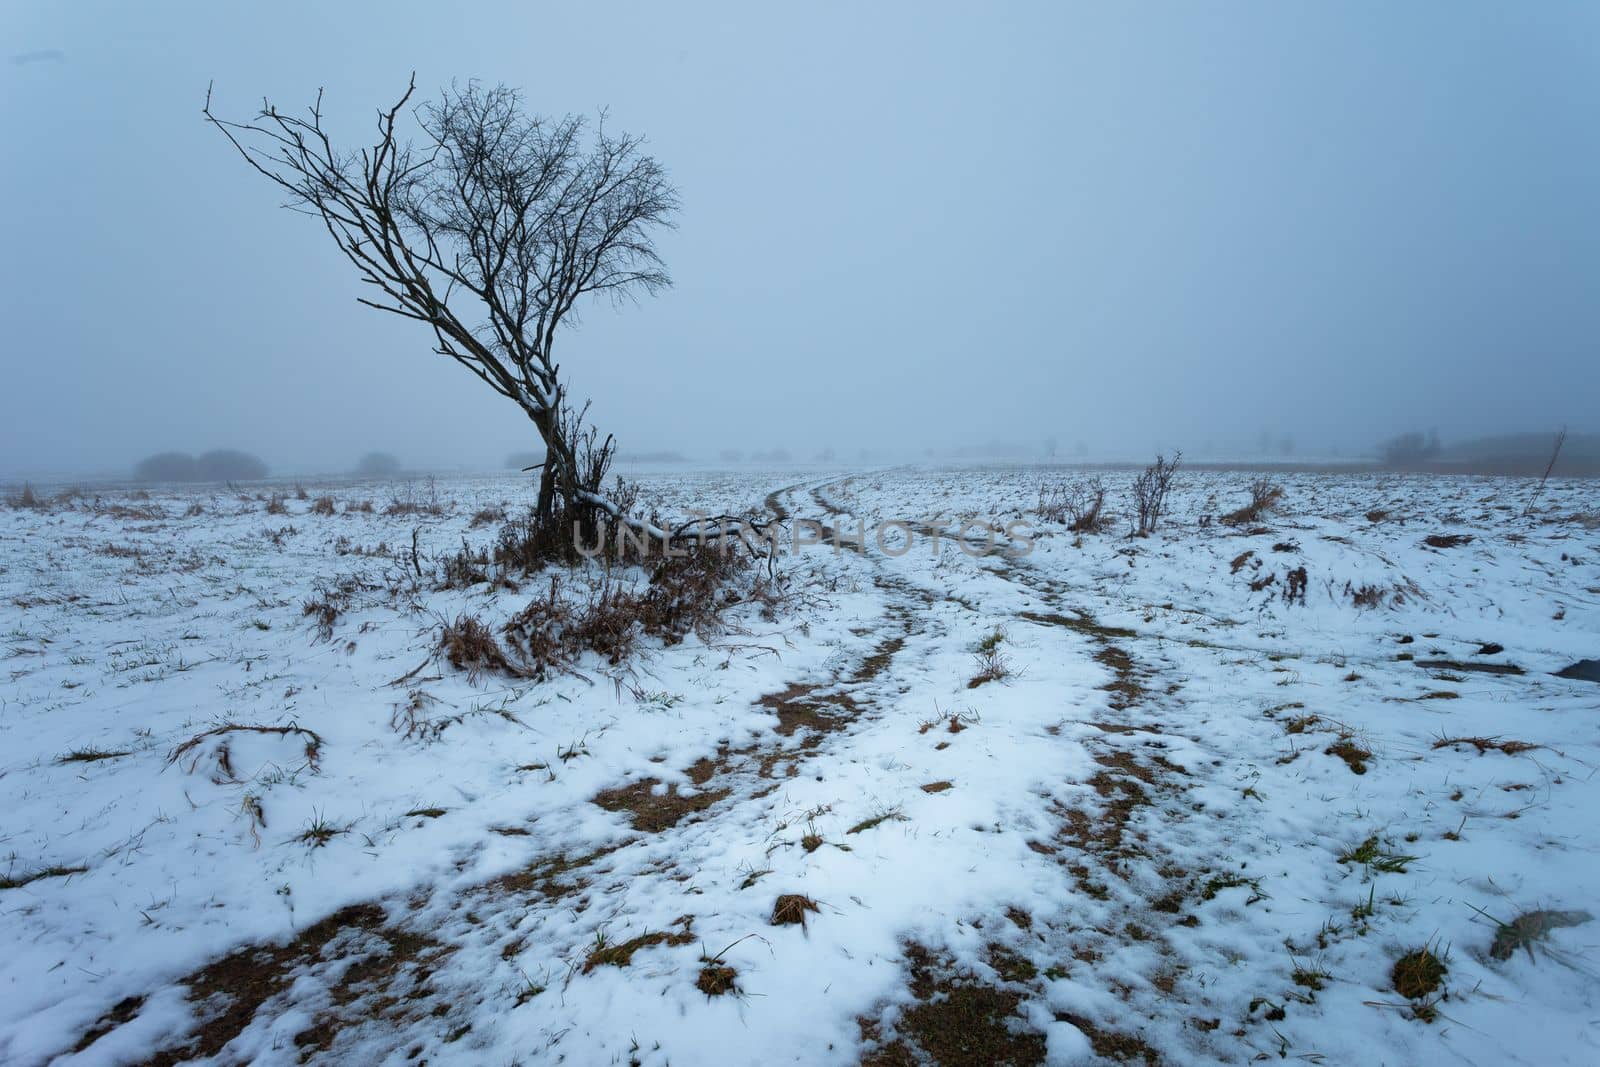 A tree by a dirt road, a view on a foggy winter day by darekb22